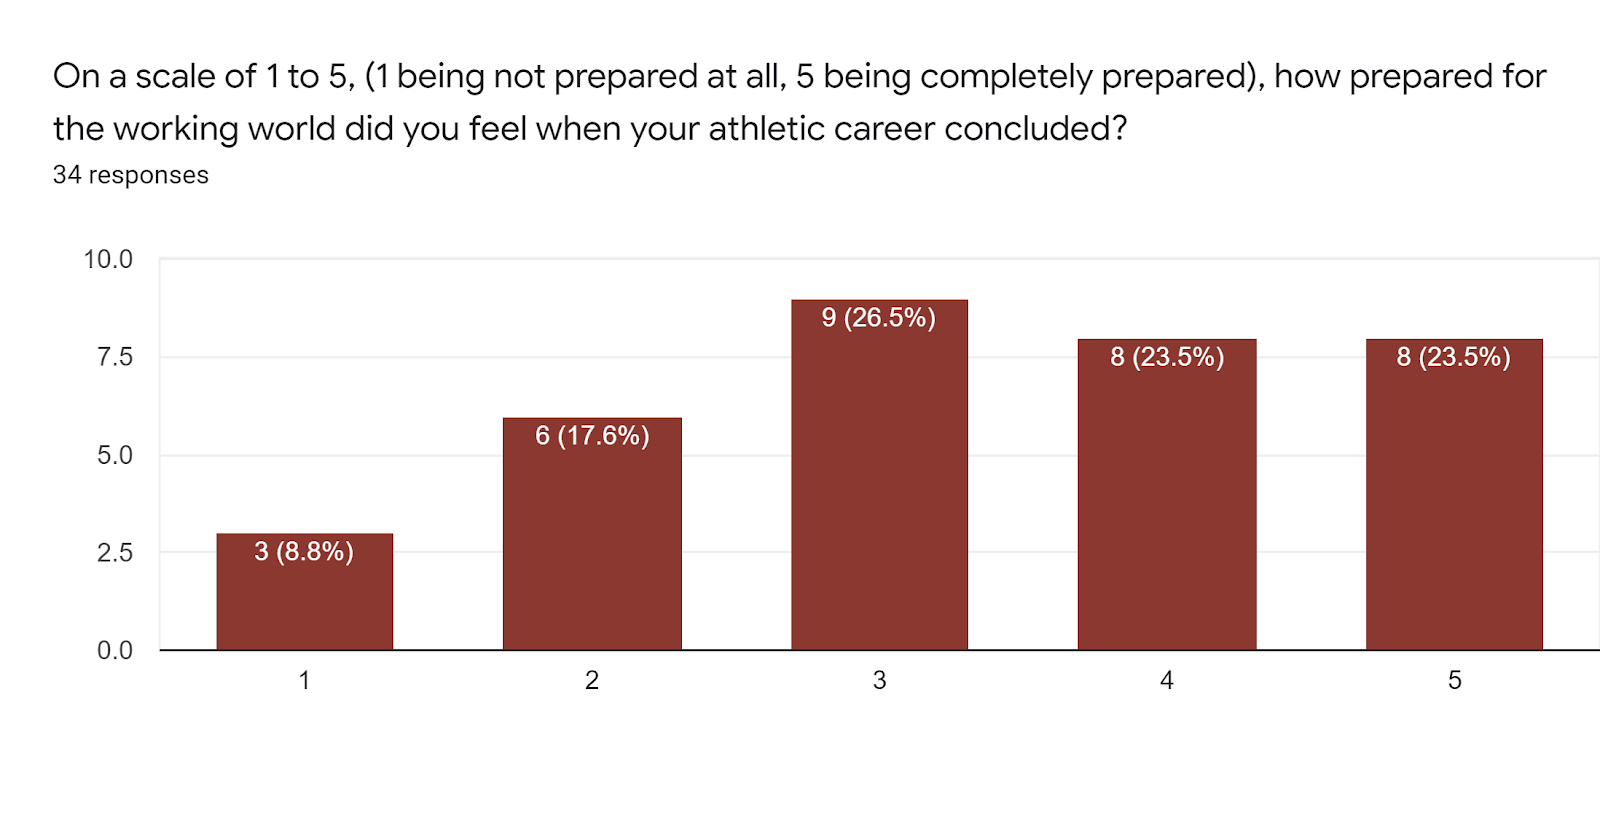 Forms response chart. Question title: On a scale of 1 to 5, (1 being not prepared at all, 5 being completely prepared), how prepared for the working world did you feel when your athletic career concluded?. Number of responses: 34 responses.